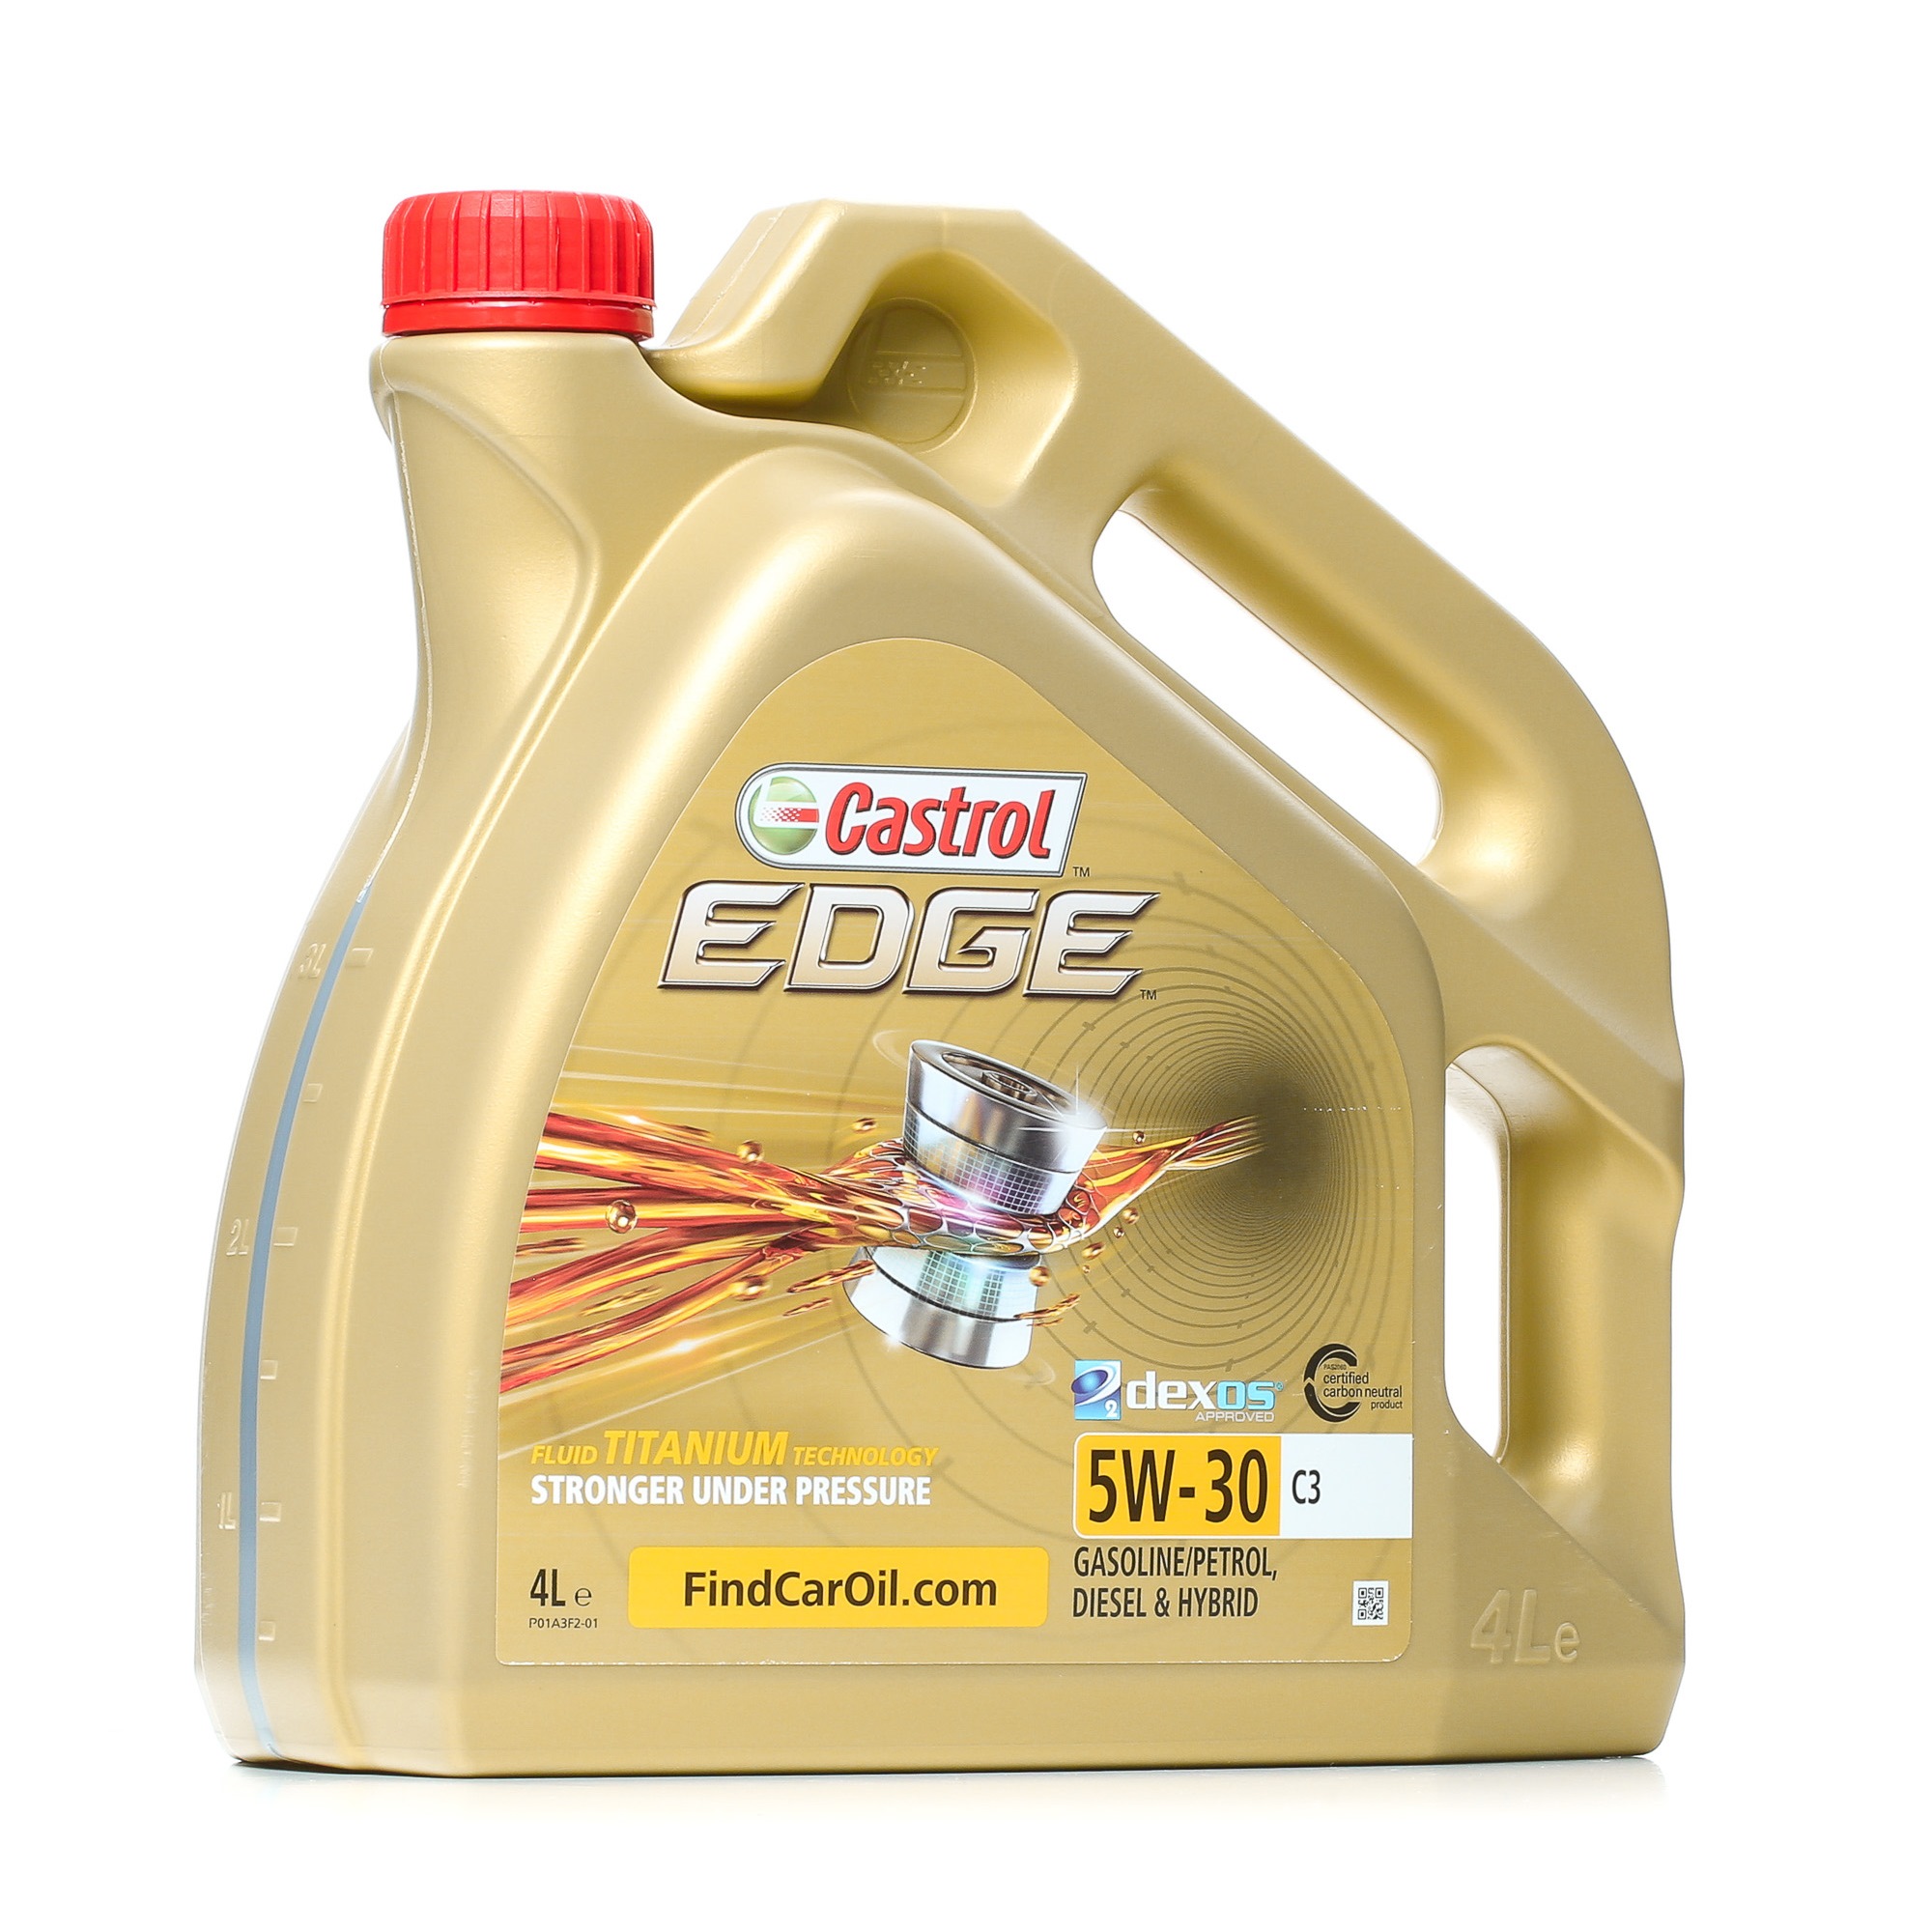 Ford Engine oil CASTROL 5W-30 at a good price